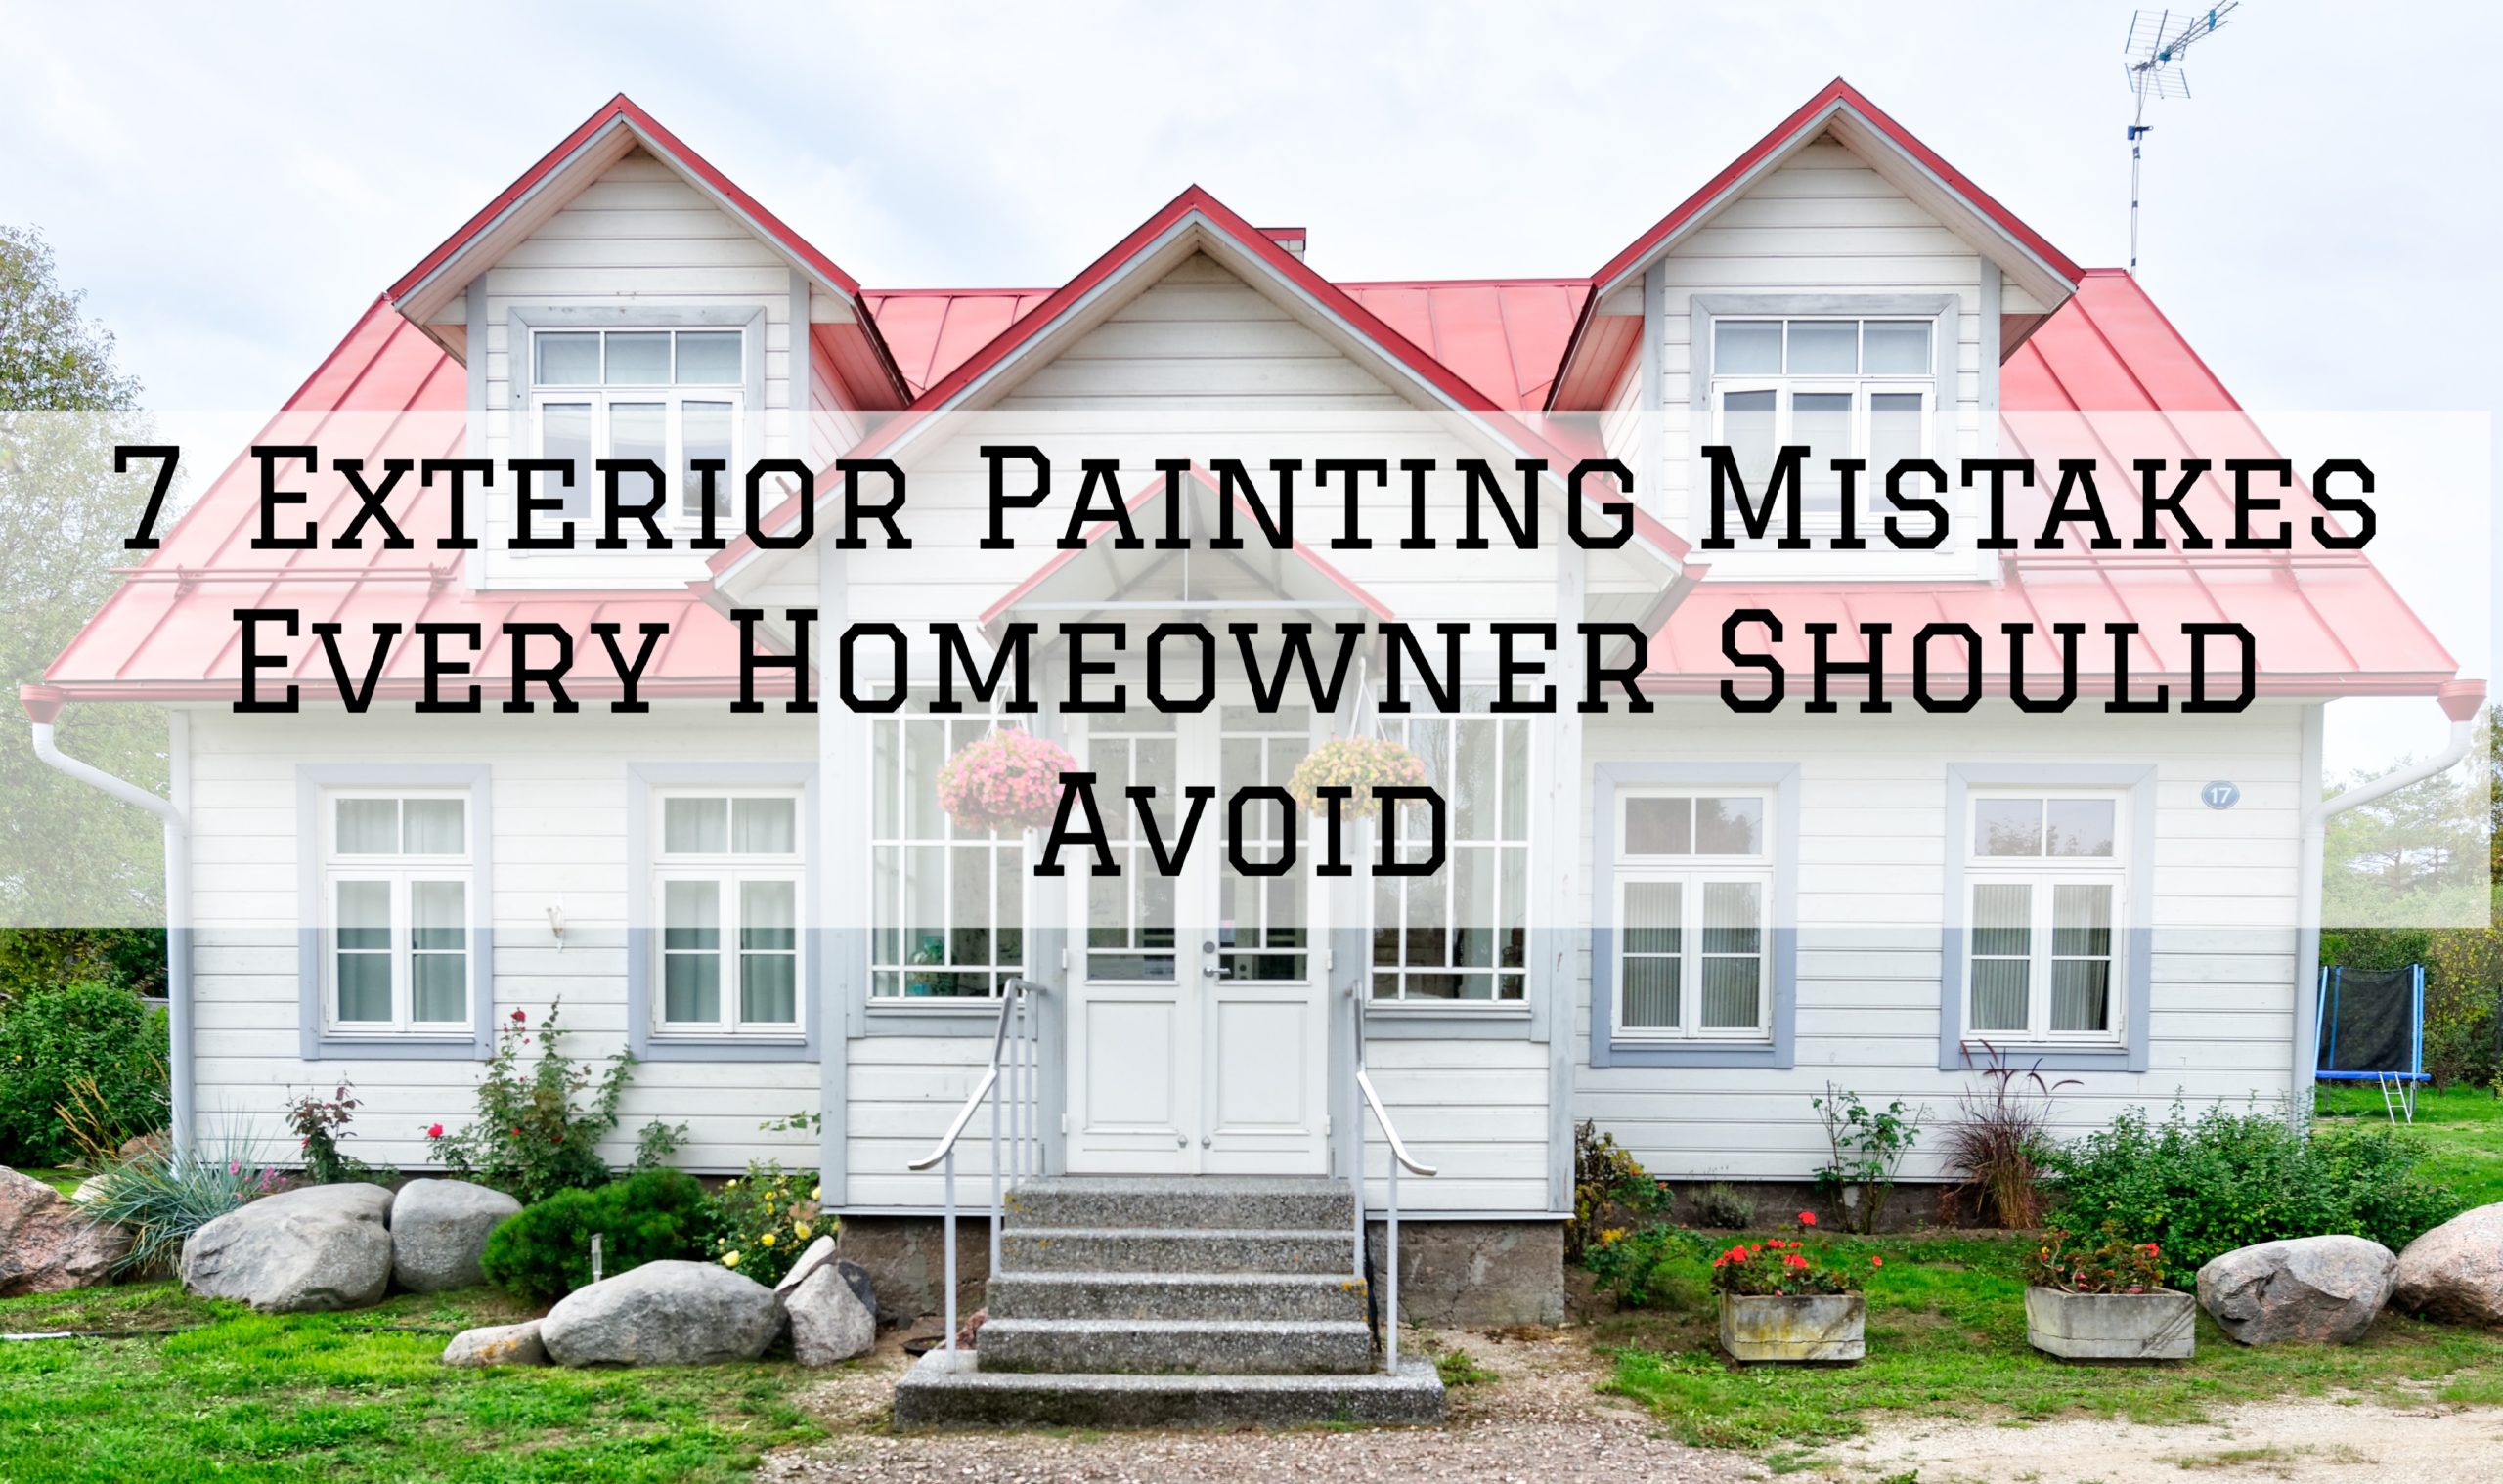 2020-03-29 Just Add Paint 7 Exterior Painting Mistakes Every Homeowner Should Avoid in Mechanicsburg